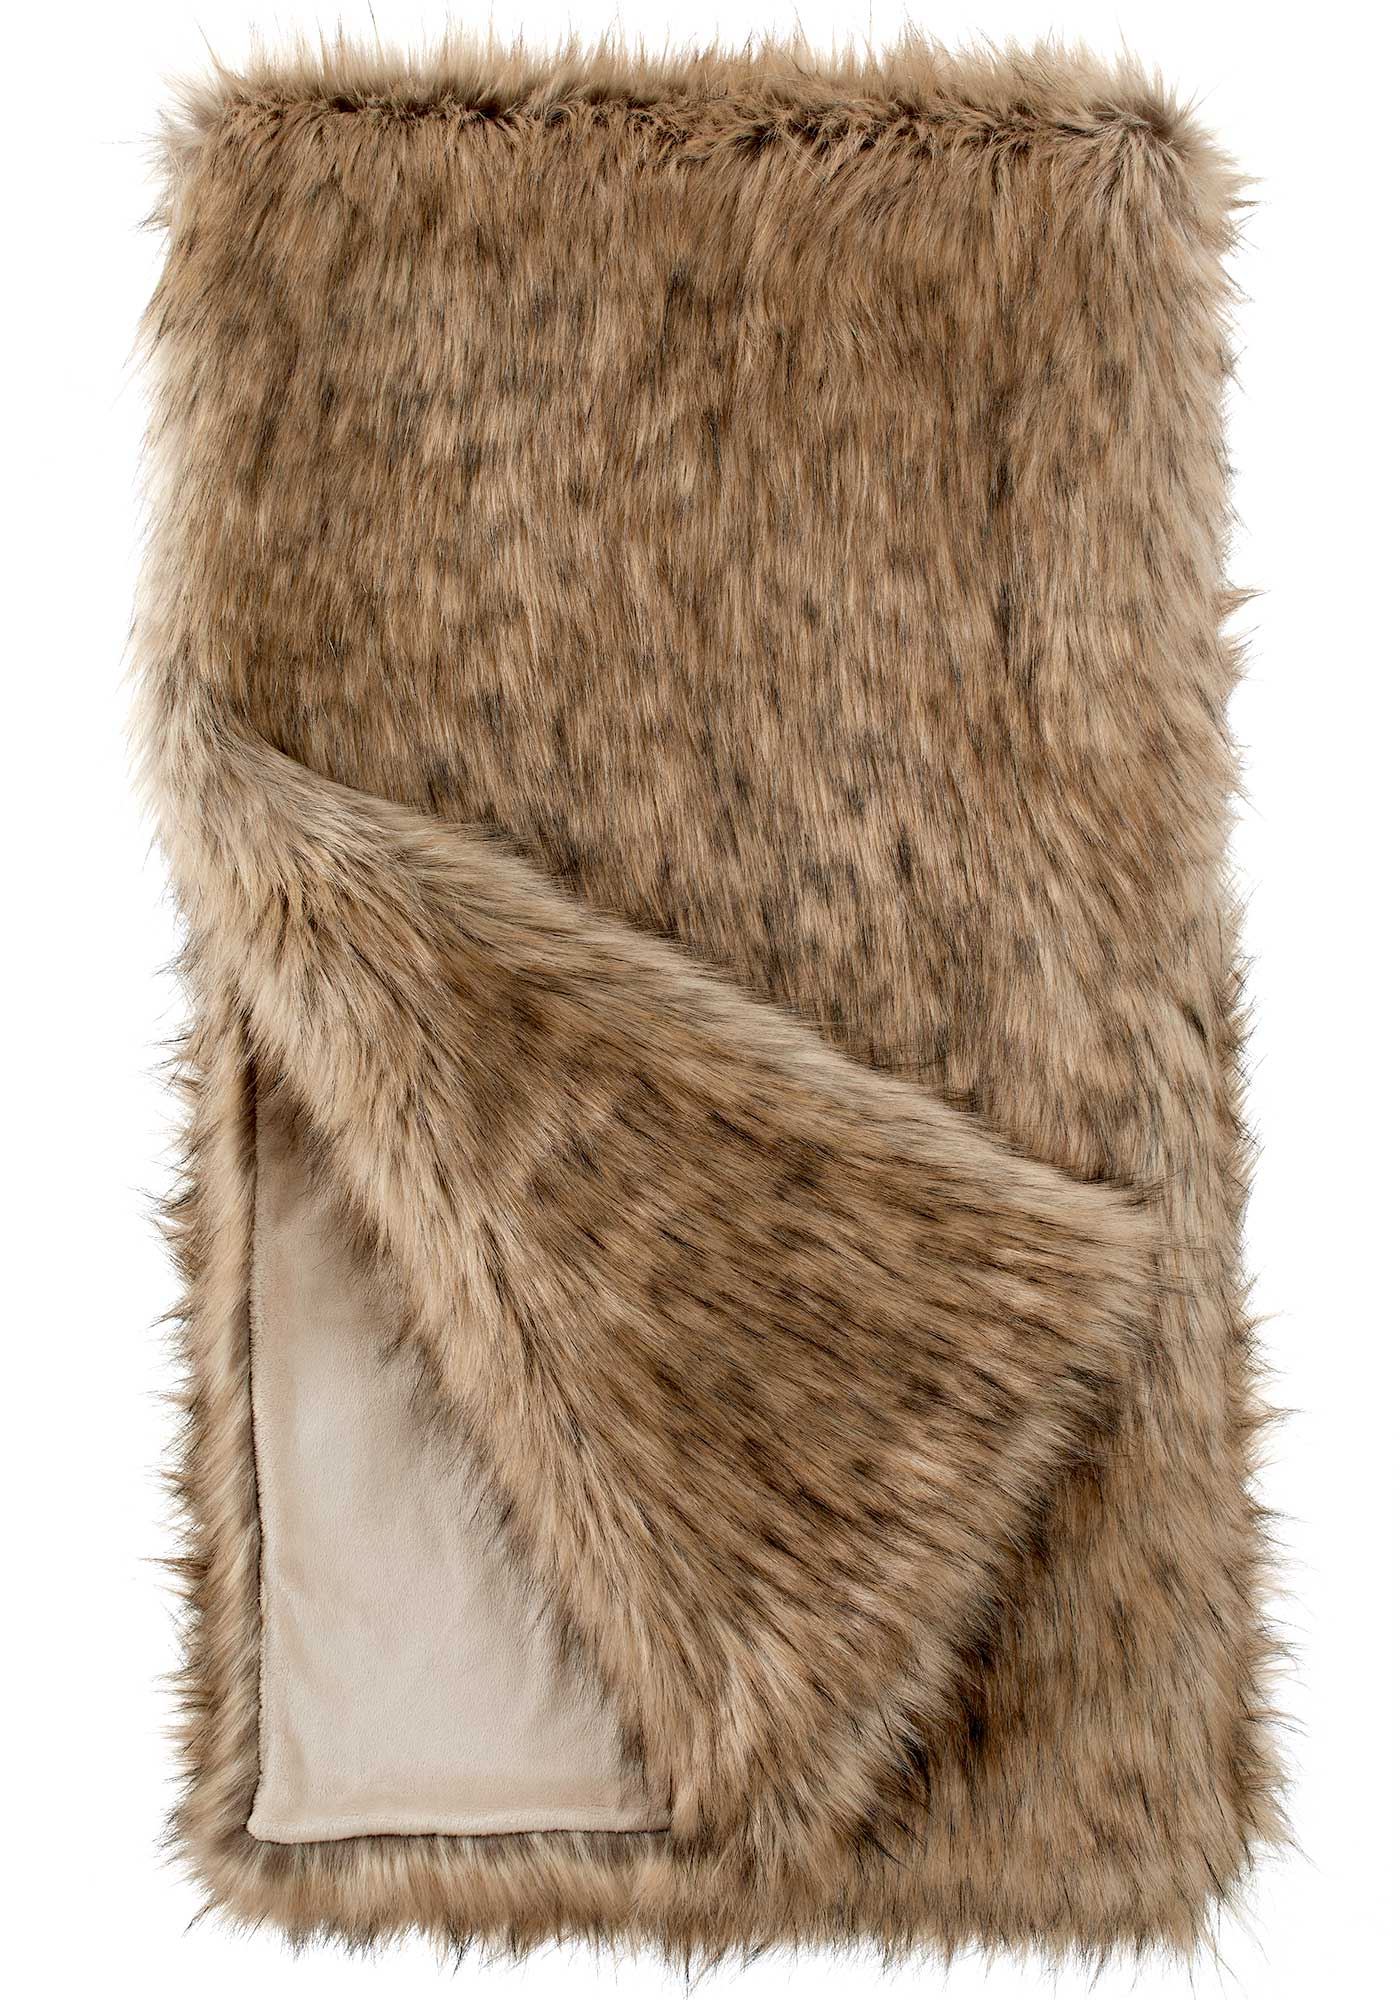 Stock your holiday gift closet and stop stressing - Fabulous Faux Furs